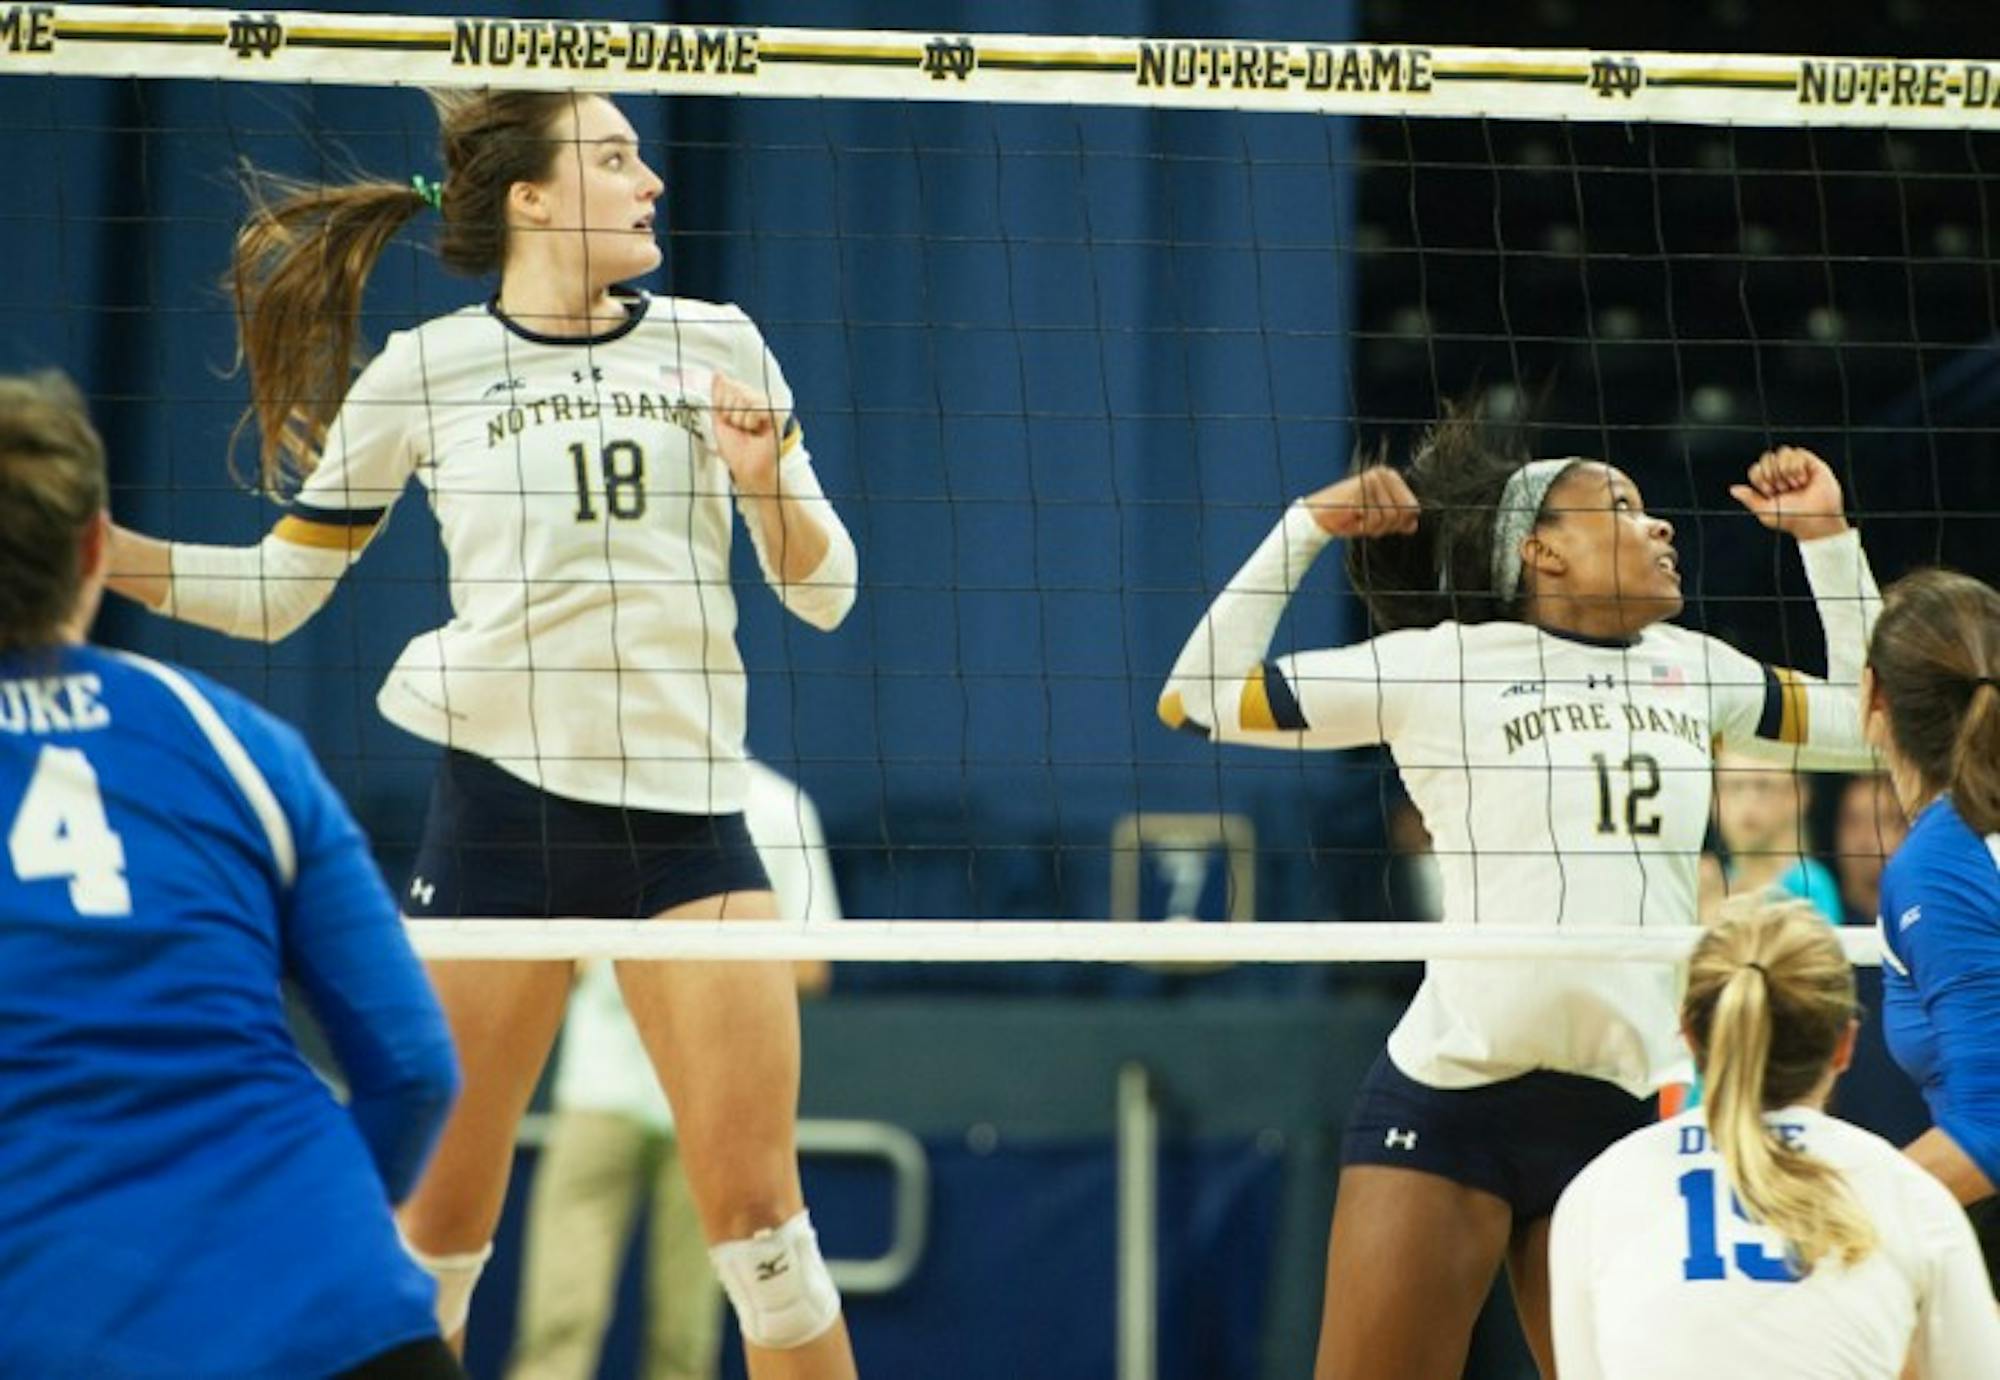 Senior Katie Higgins and freshman Jemma Yeadon prepare to block a spike during Notre Dame’s 3-1 victory over Duke on Sept. 30.